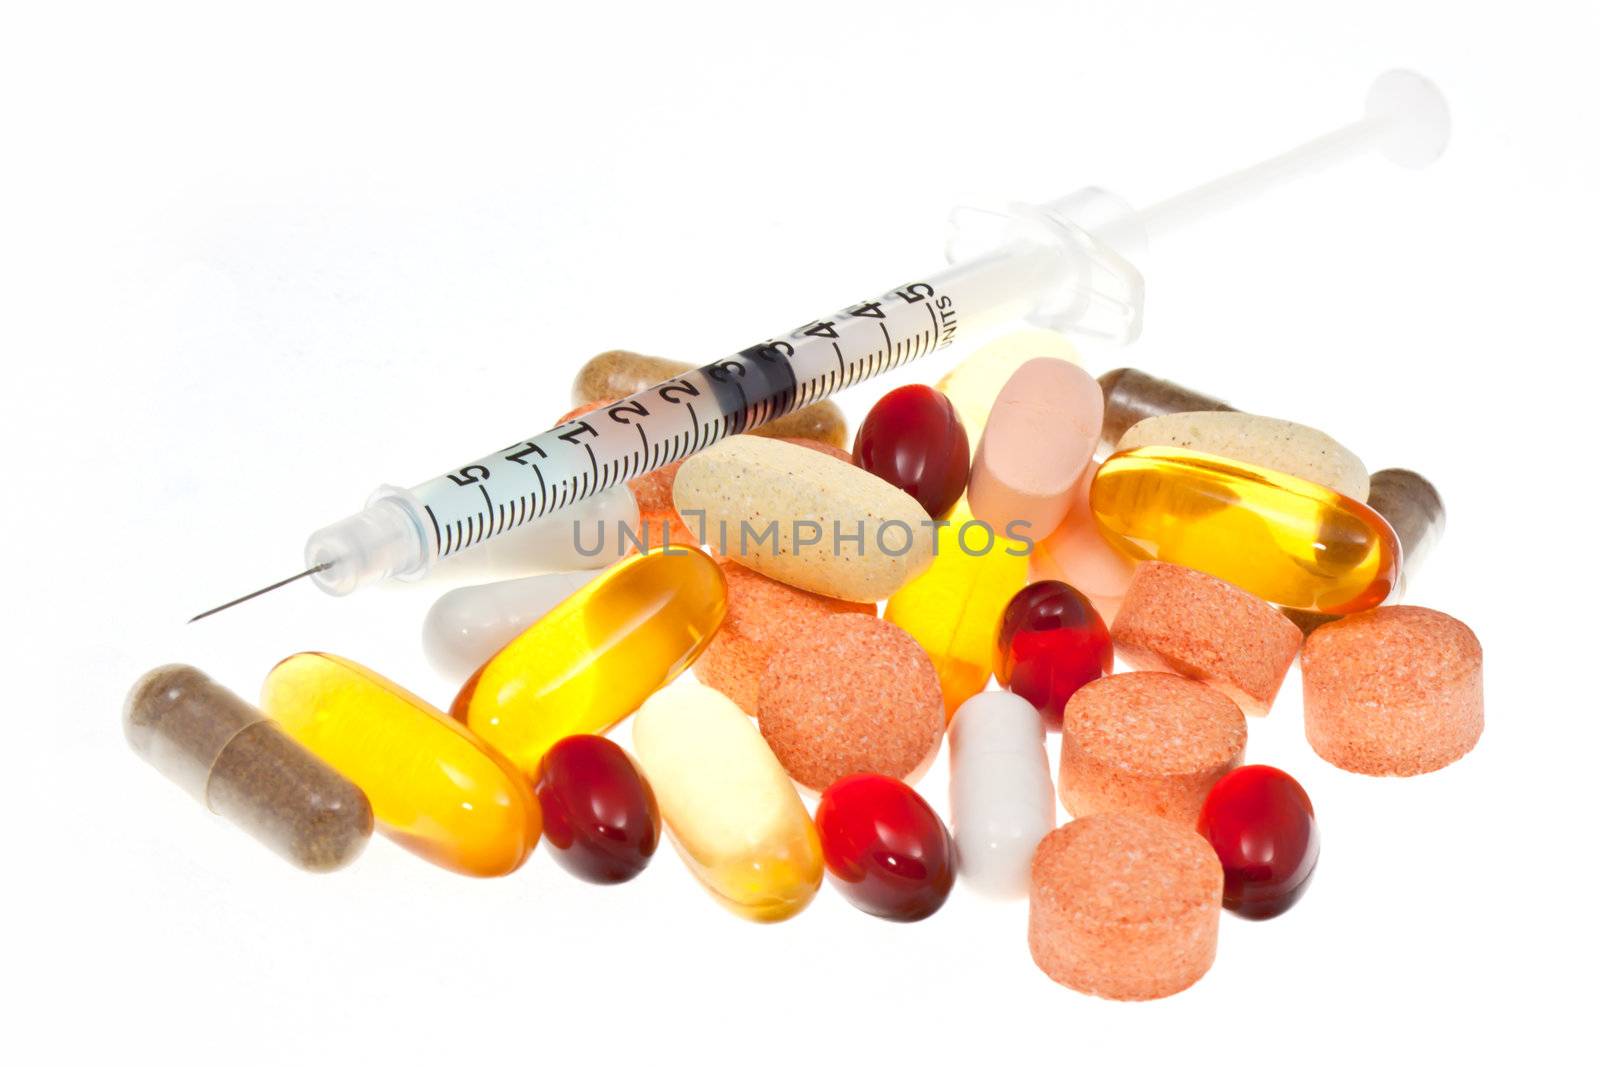 Syringe with supplements on white background